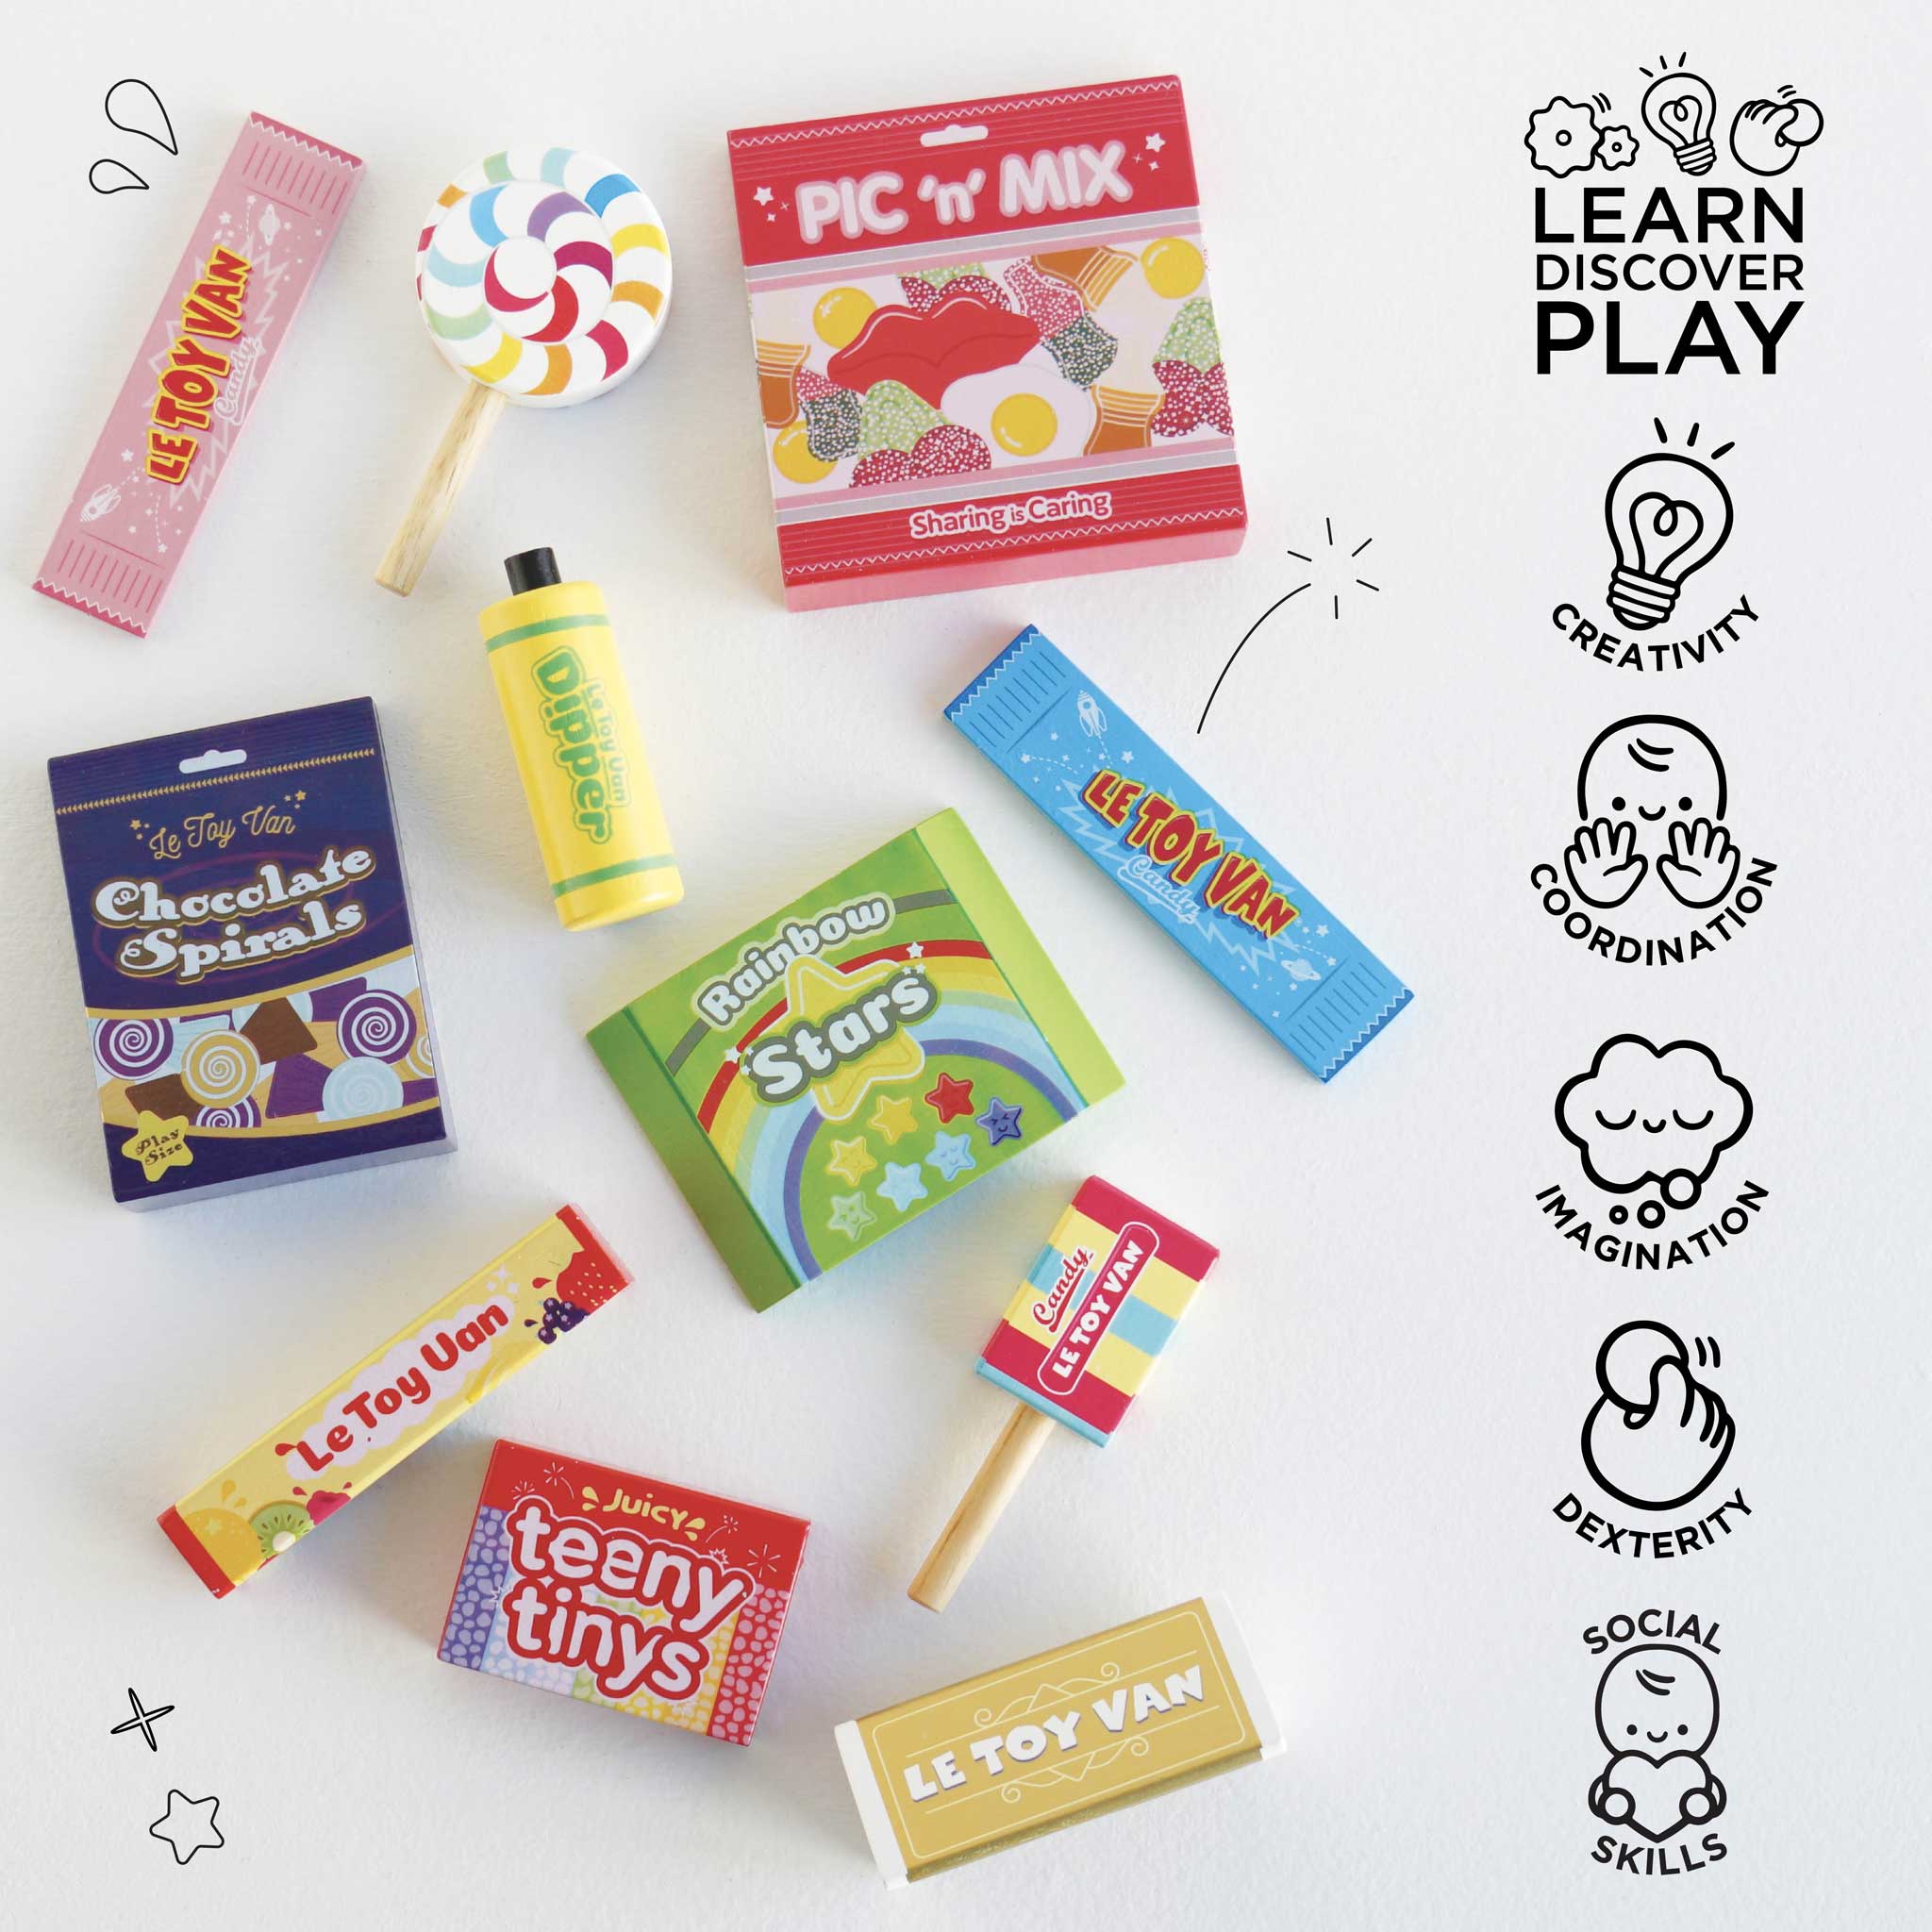 Retro Sweets and Candy Roleplay Set